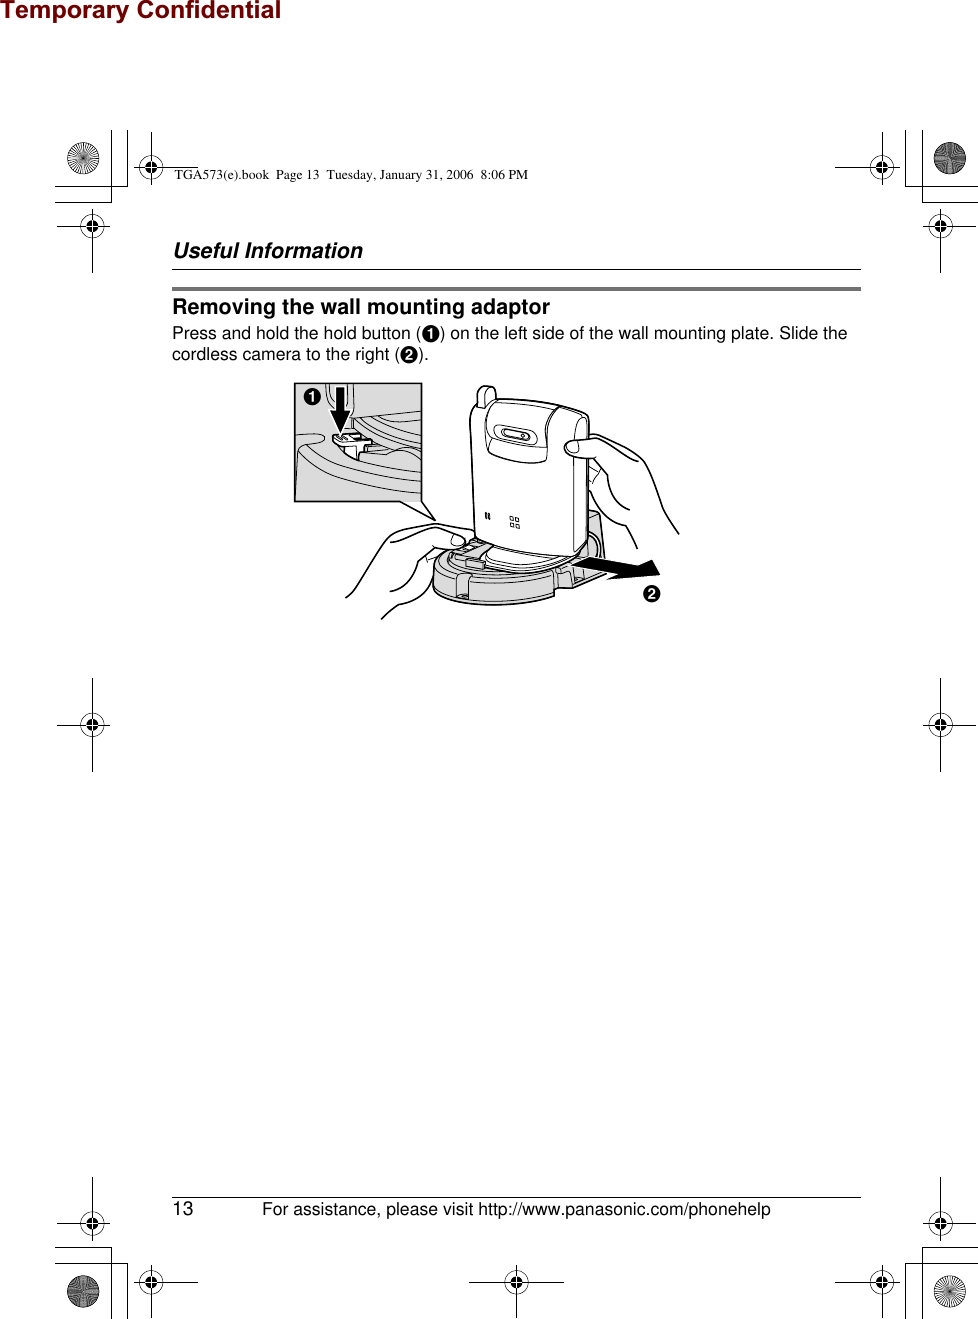 Temporary ConfidentialUseful Information13 For assistance, please visit http://www.panasonic.com/phonehelpRemoving the wall mounting adaptorPress and hold the hold button (A) on the left side of the wall mounting plate. Slide the cordless camera to the right (B).BATGA573(e).book  Page 13  Tuesday, January 31, 2006  8:06 PM